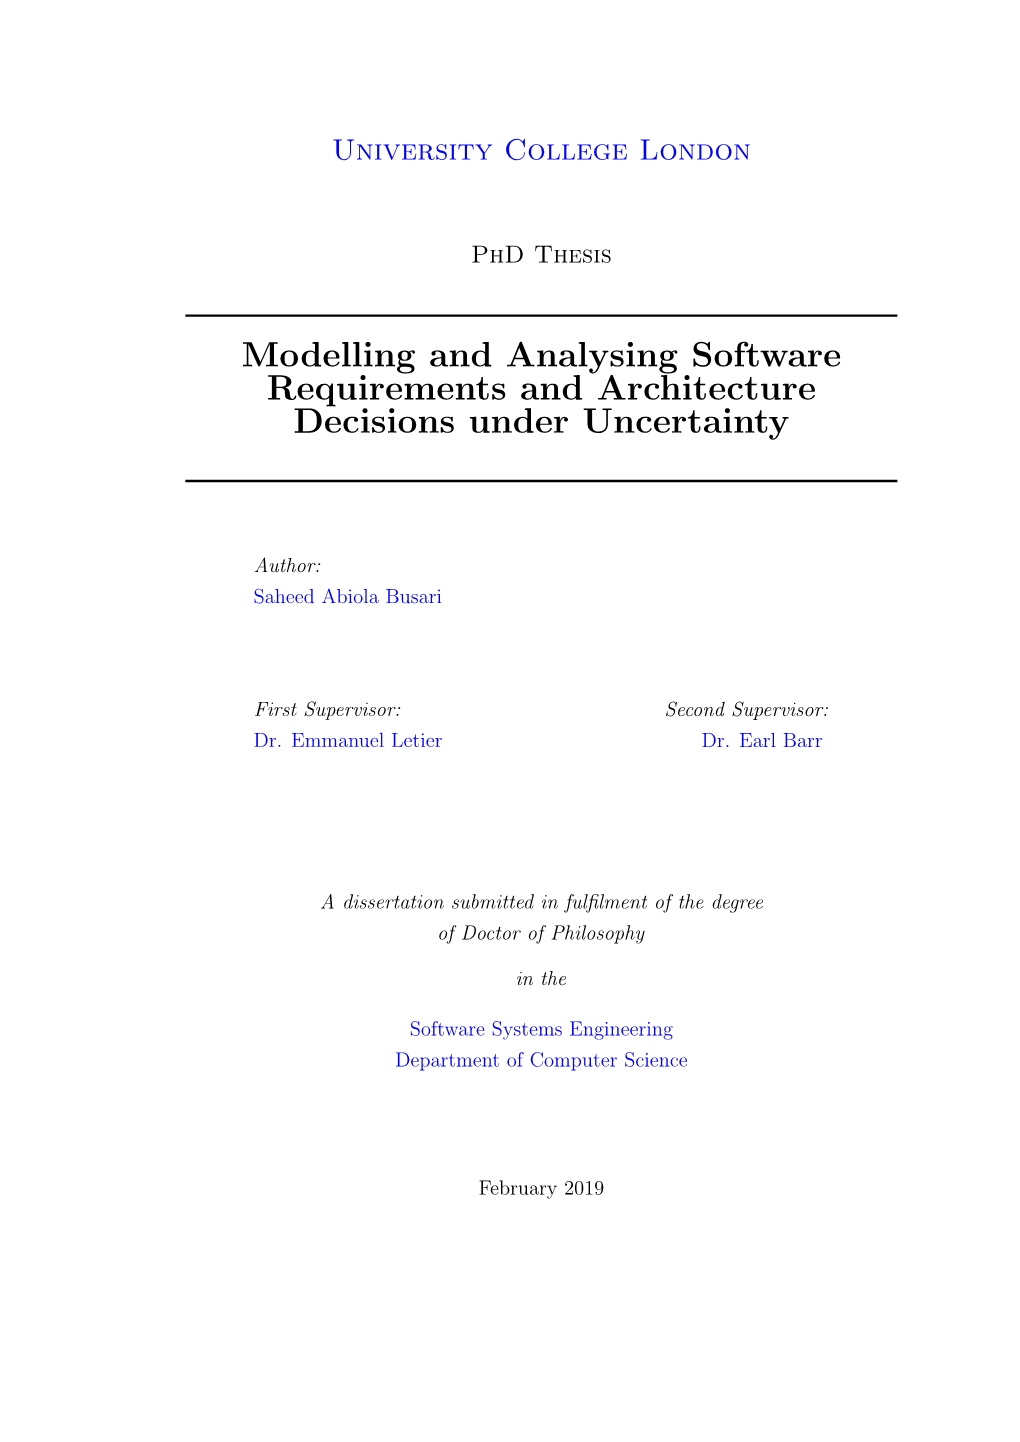 Modelling and Analysing Software Requirements and Architecture Decisions Under Uncertainty